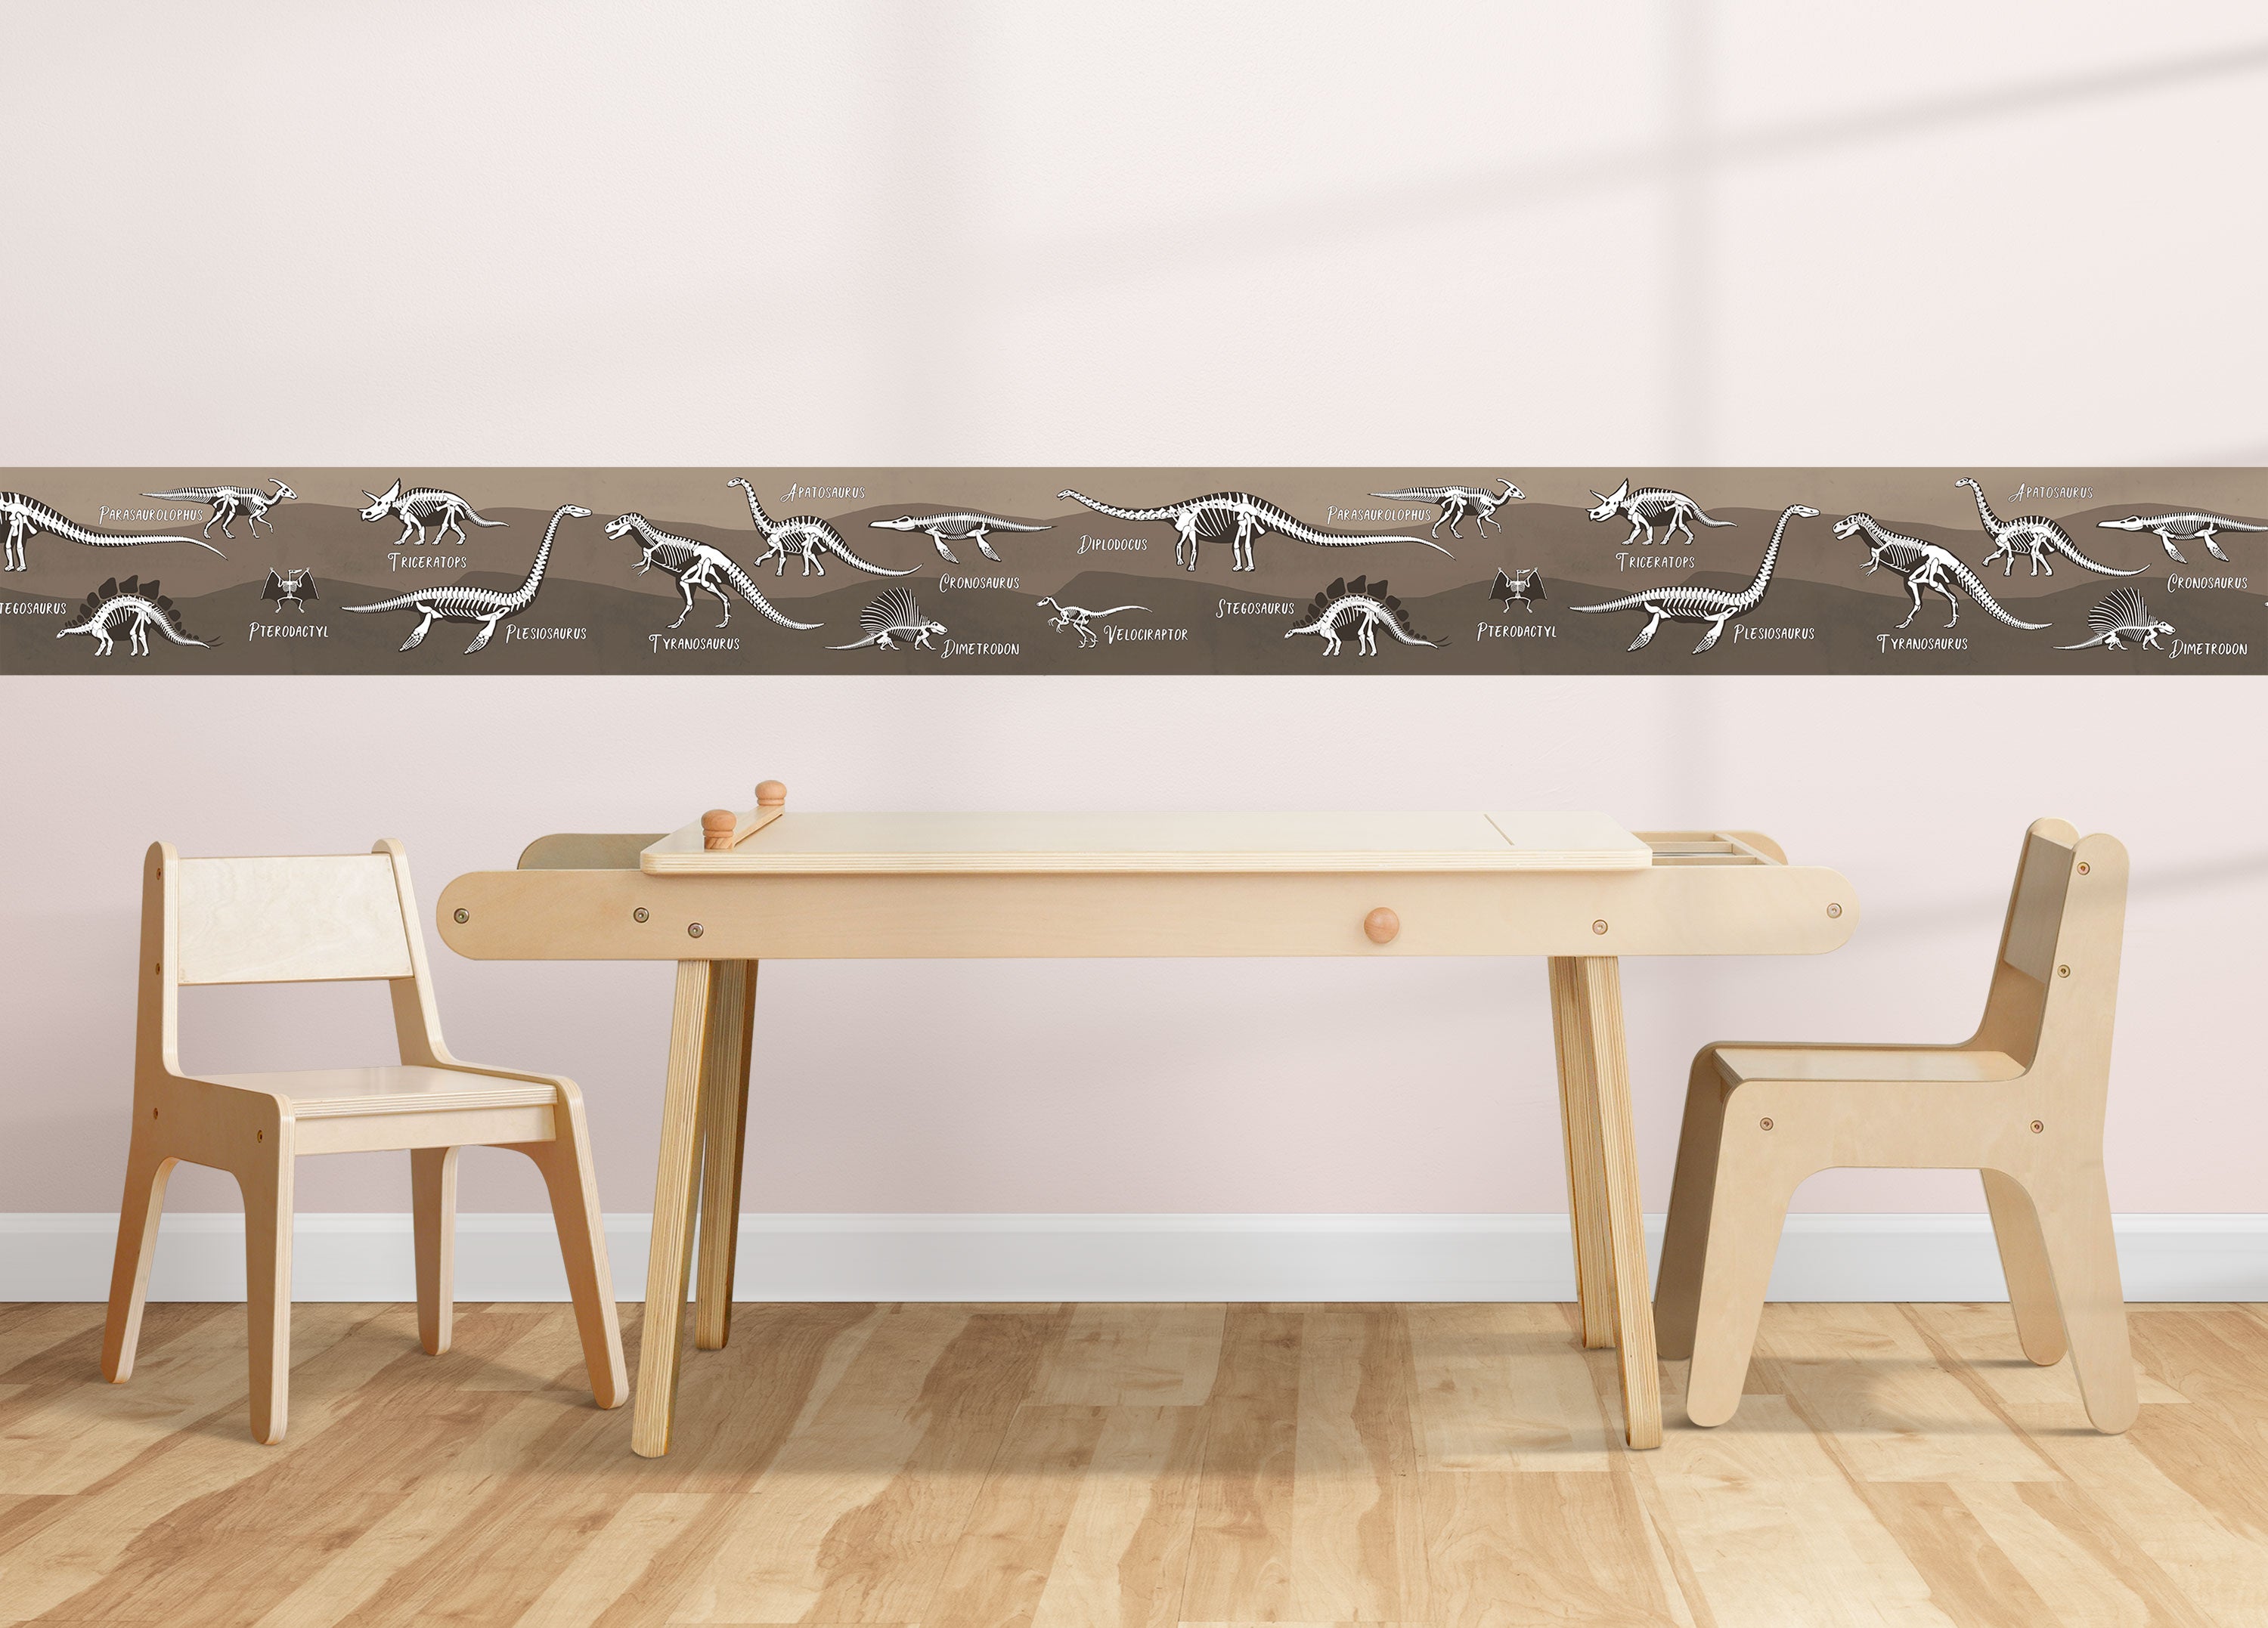 GB90240g8 Grace & Gardenia X-Ray Dinosaurs Peel and Stick Wallpaper Border 8in Height x 18ft Long, Brown Black White